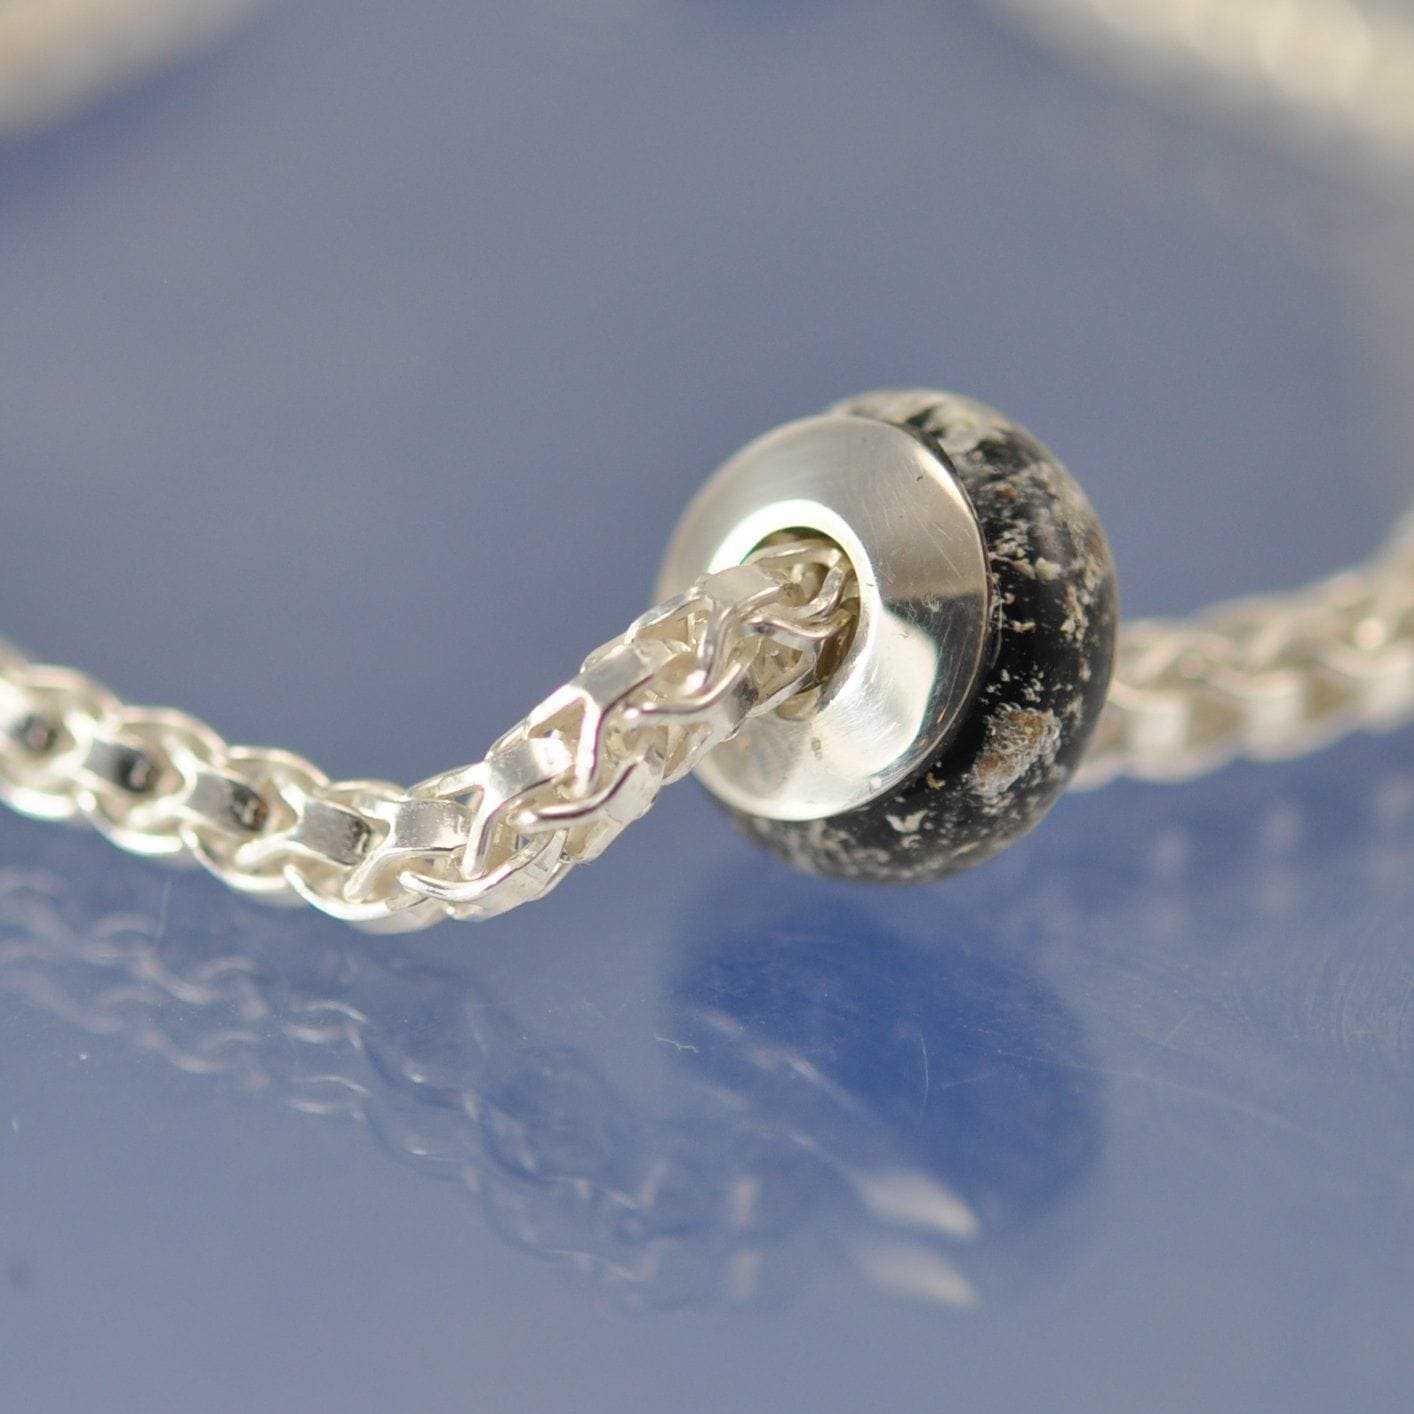 Cremation Ashes Into Glass Bead ON  a Dovetail 4mm Bracelet Bead by Chris Parry Jewellery